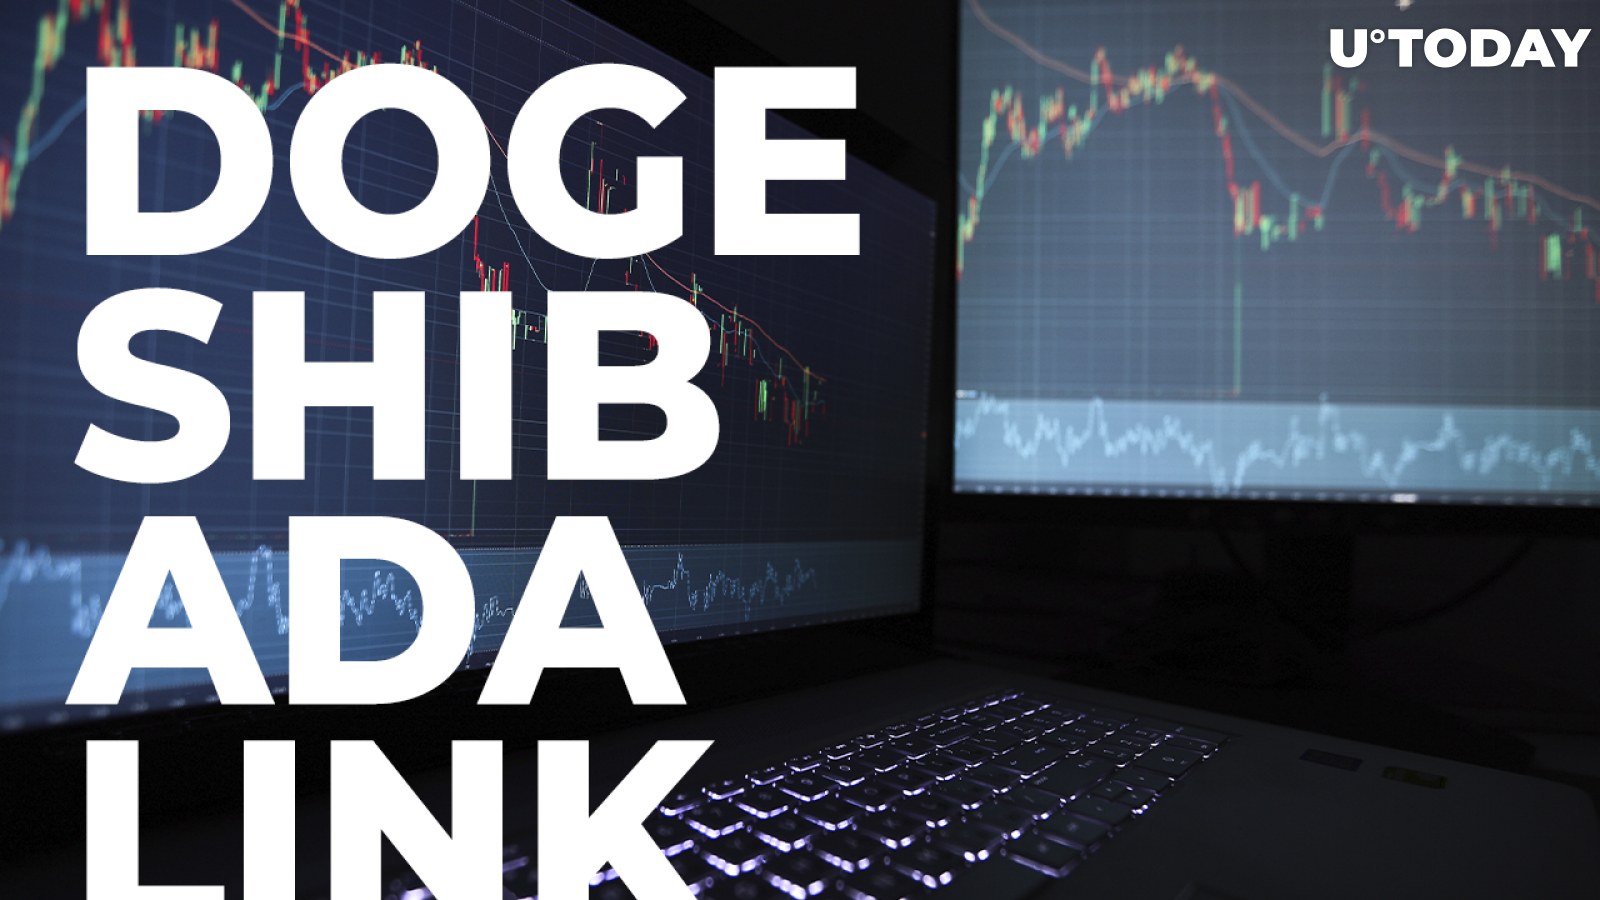  DOGE, SHIB, ADA and LINK are Among Top 11 Coins Held by Largest BSC Whales: Details